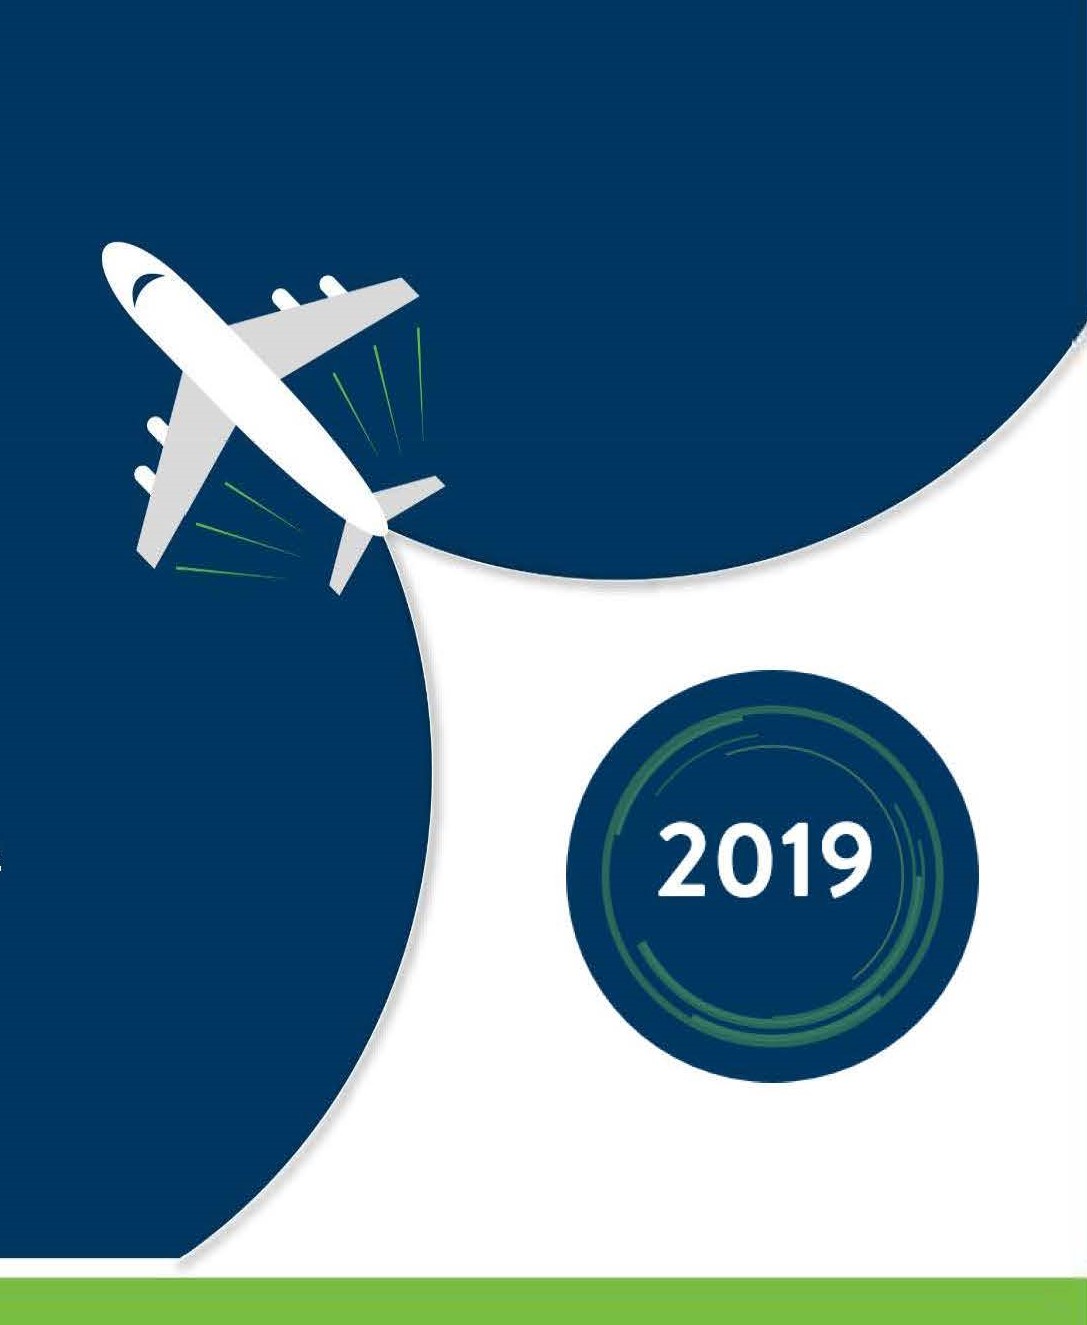 Animation of airplane from above with "2019" behind it